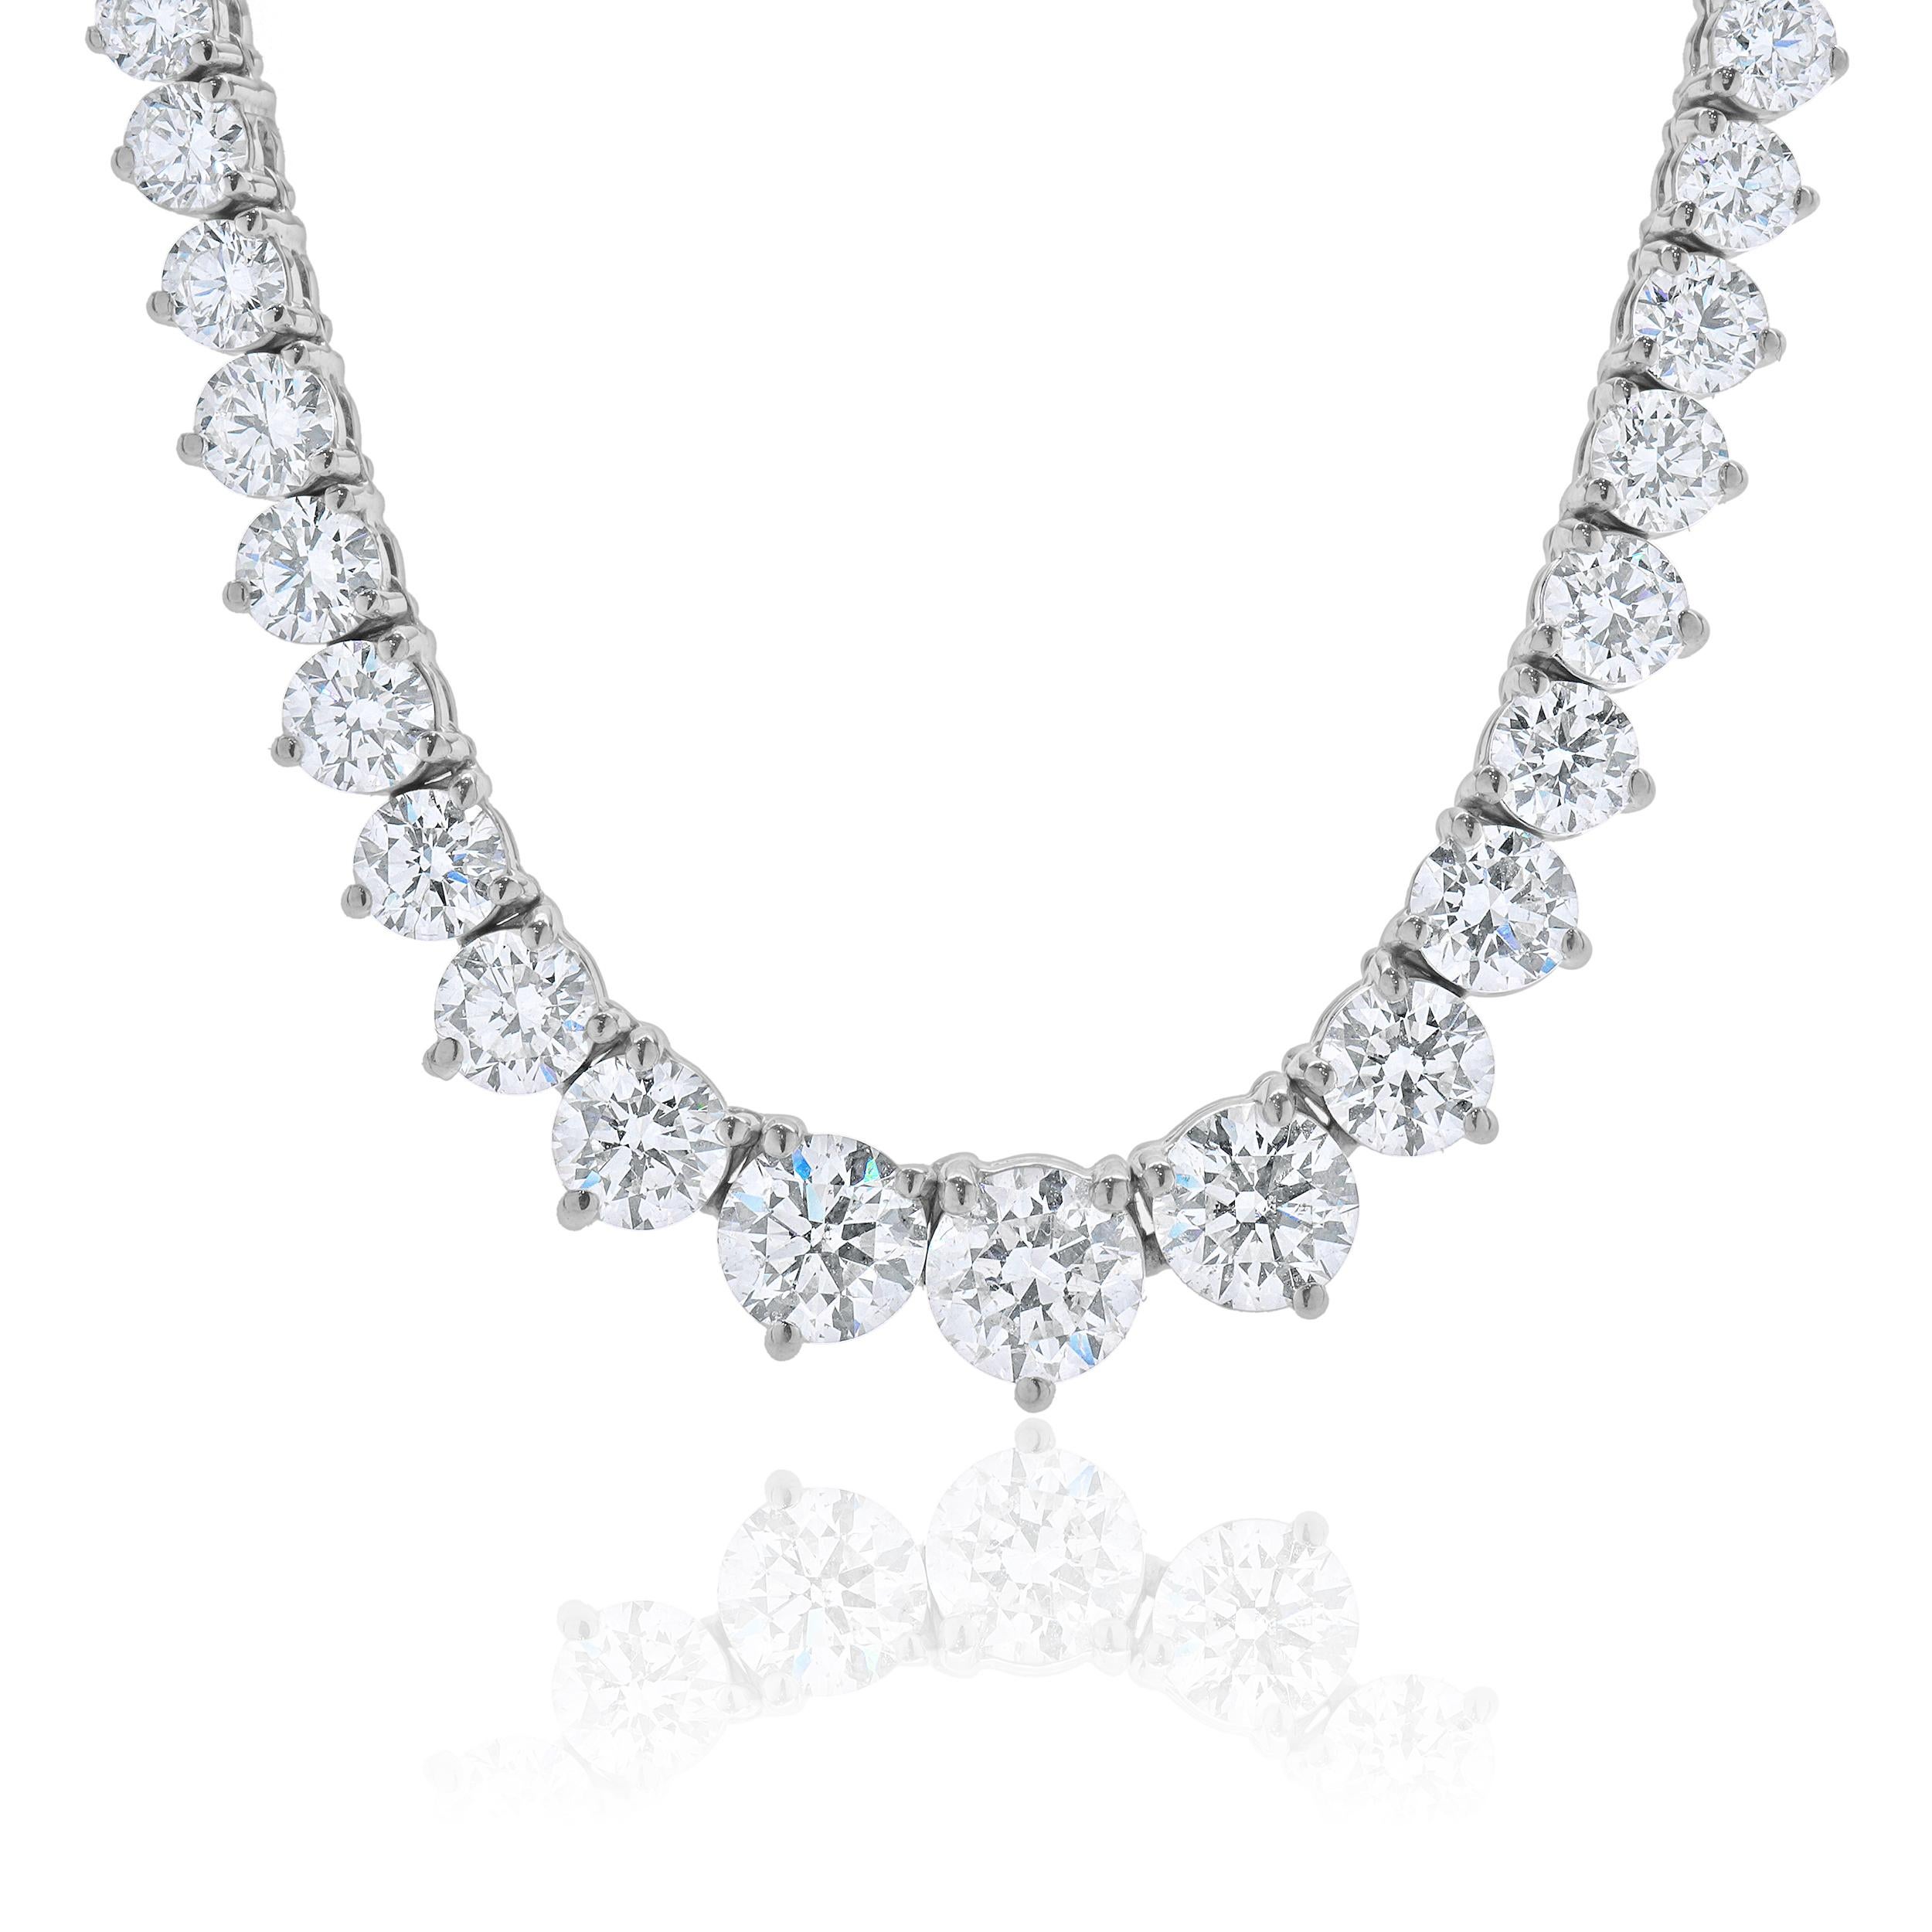 Designer: custom
Material: 14K white gold
Diamonds: 153 round brilliant = 9.76cttw
Color: G / H
Clarity: VS-SI1
Dimensions: necklace measures 16-inches in length 
Weight: 20.68 grams
